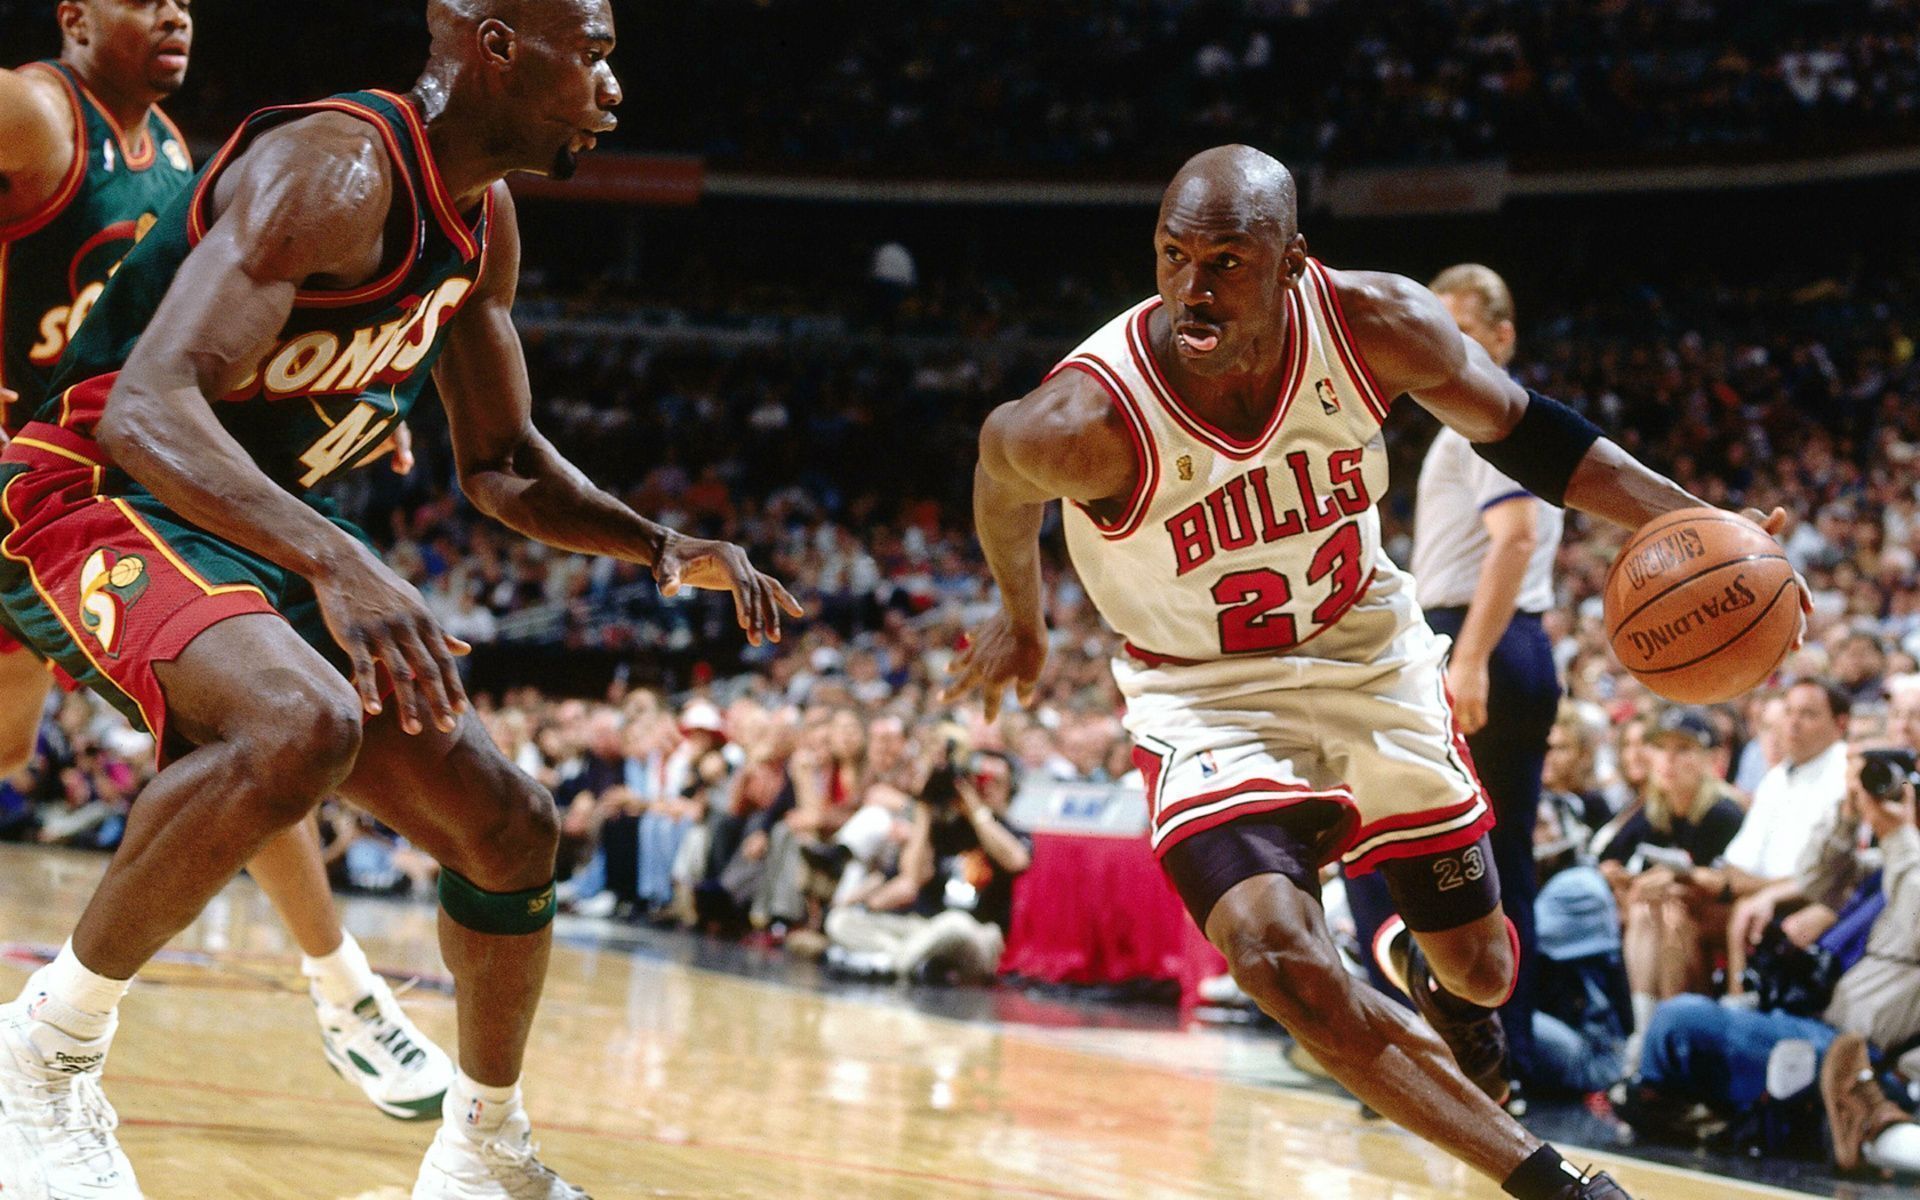 The Bulls and Sonics are set to square off in the 2021 NBA Playoffs. - Michael Jordan, Air Jordan